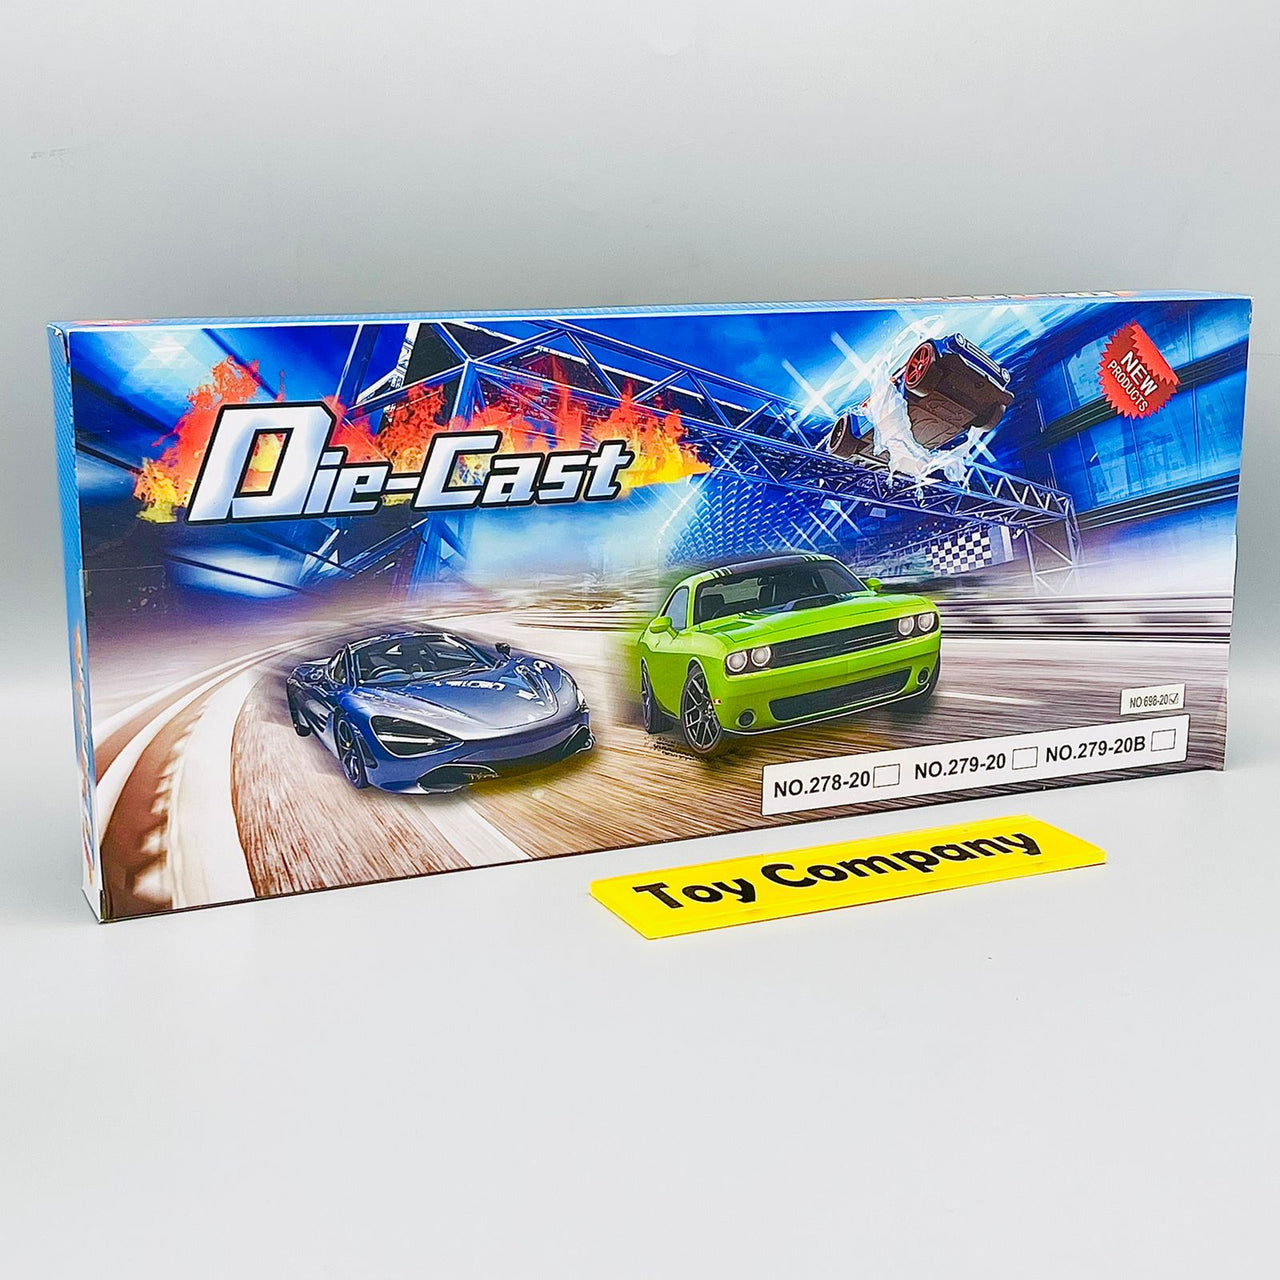 Diecast Hot Wheels Style Set of 20 Vehicles